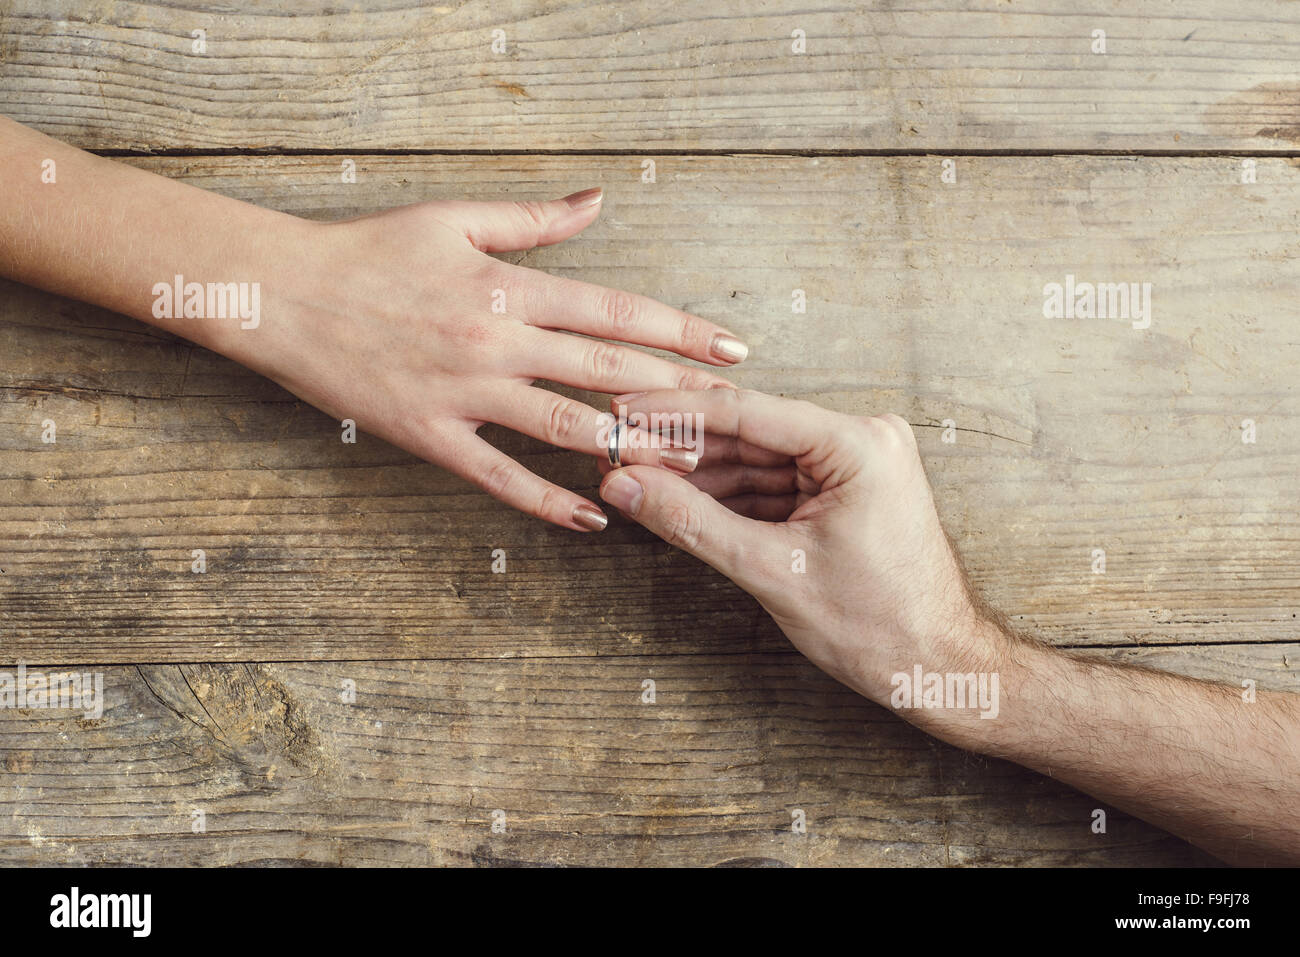 Man putting on engagement ring tenderly to his woman. Studio shot on a wooden background, view from above. Stock Photo